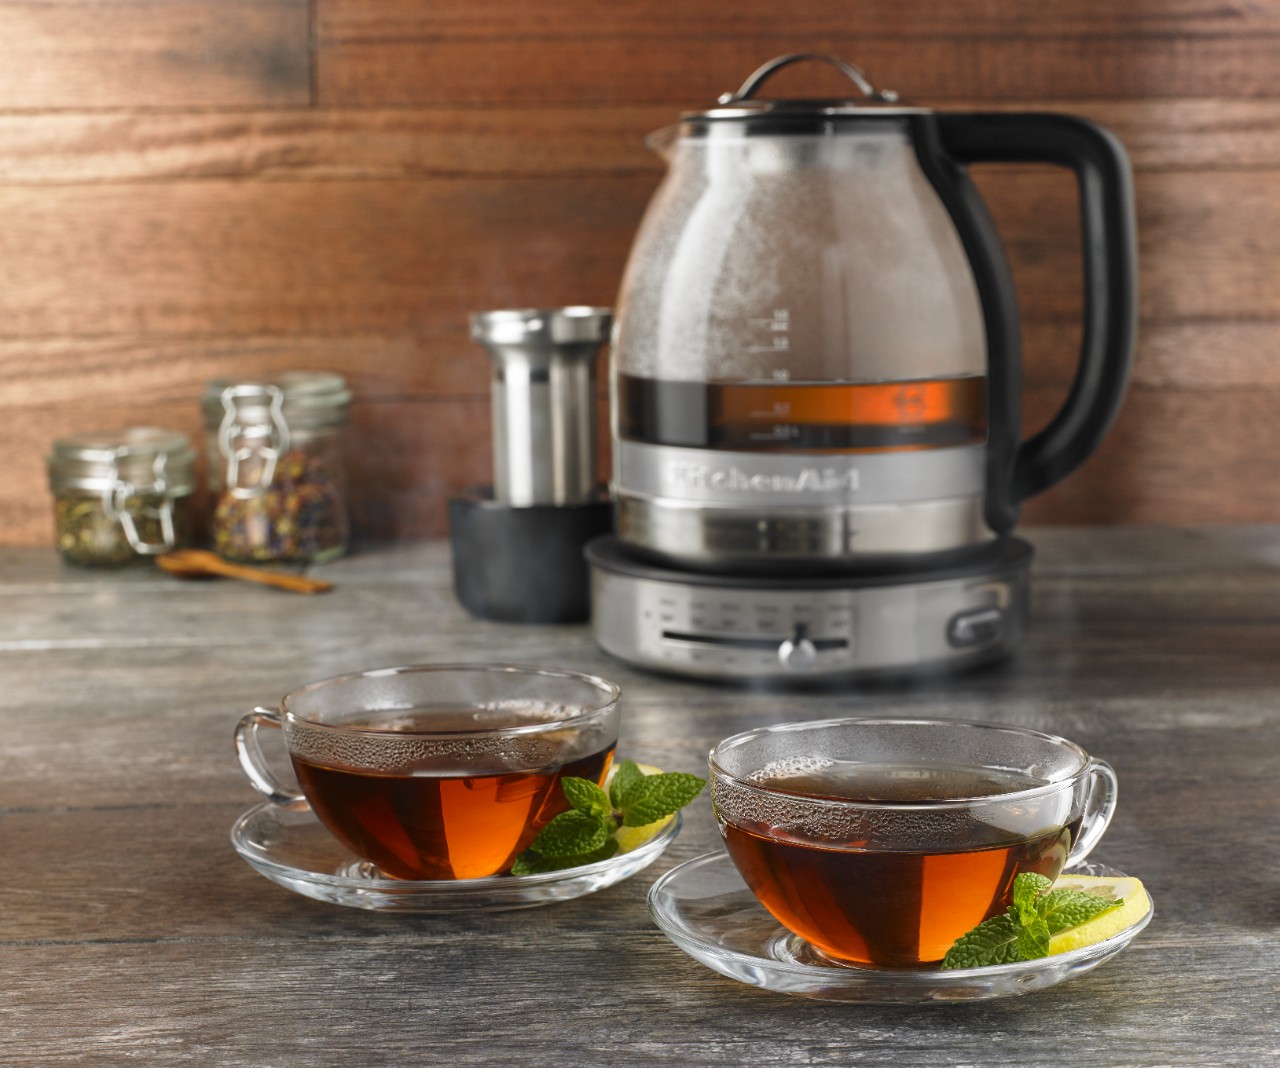 Our kettles are designed for easy filling and cleaning.